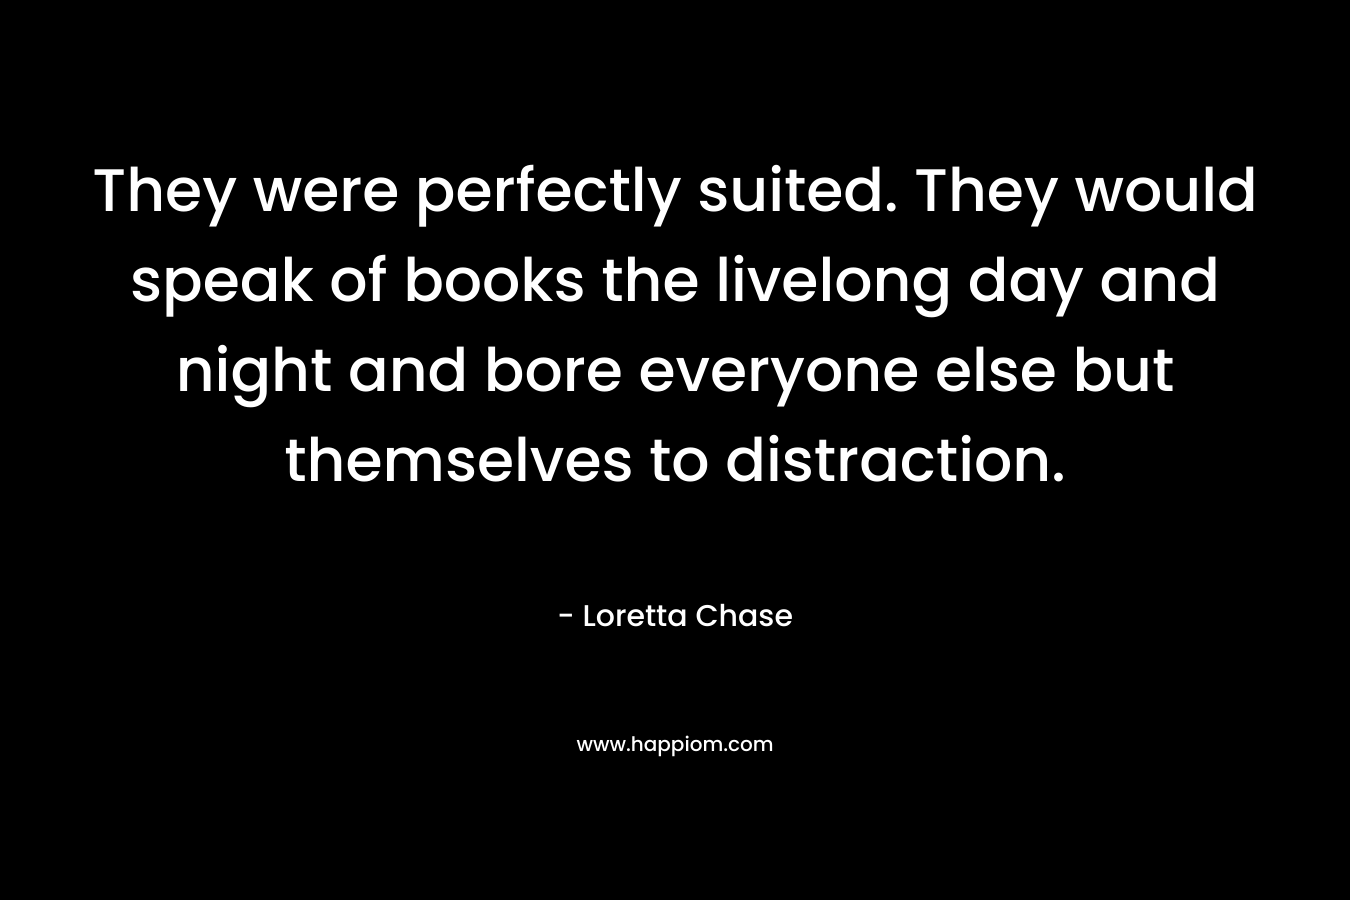 They were perfectly suited. They would speak of books the livelong day and night and bore everyone else but themselves to distraction.